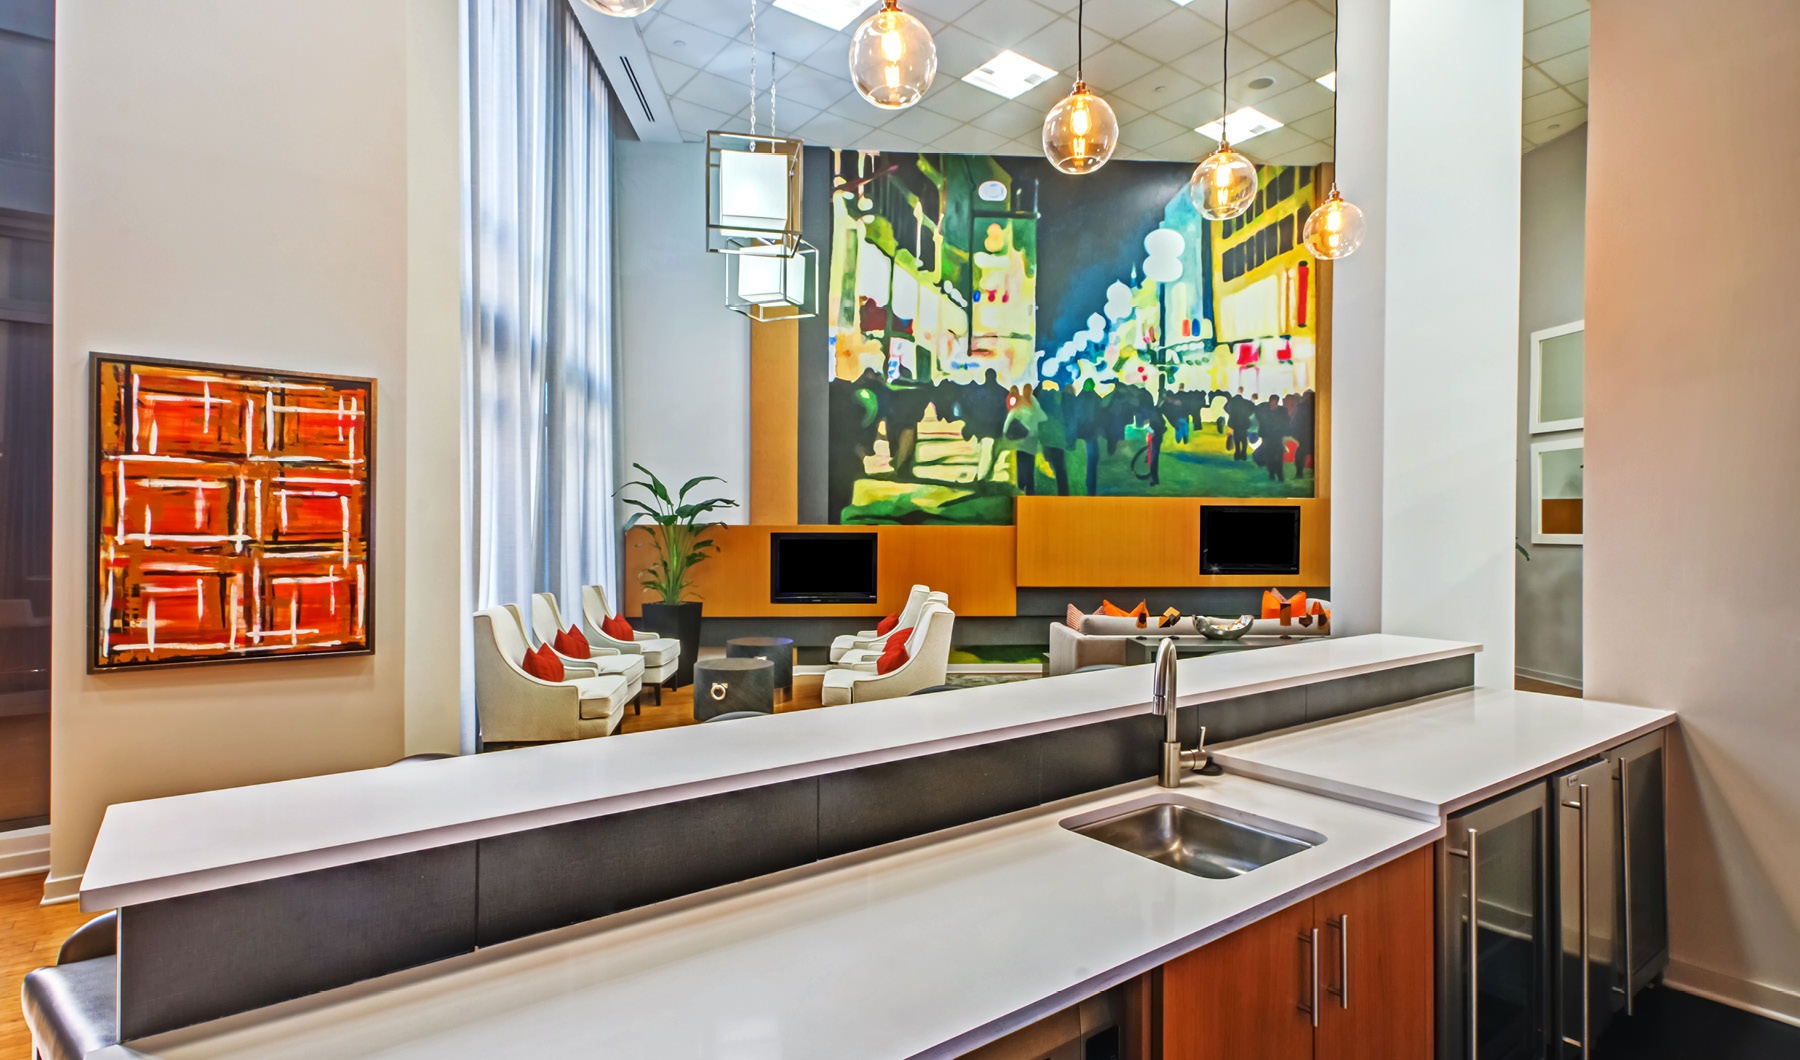 kitchen countertop with sink looks out into brightly lit clubhouse